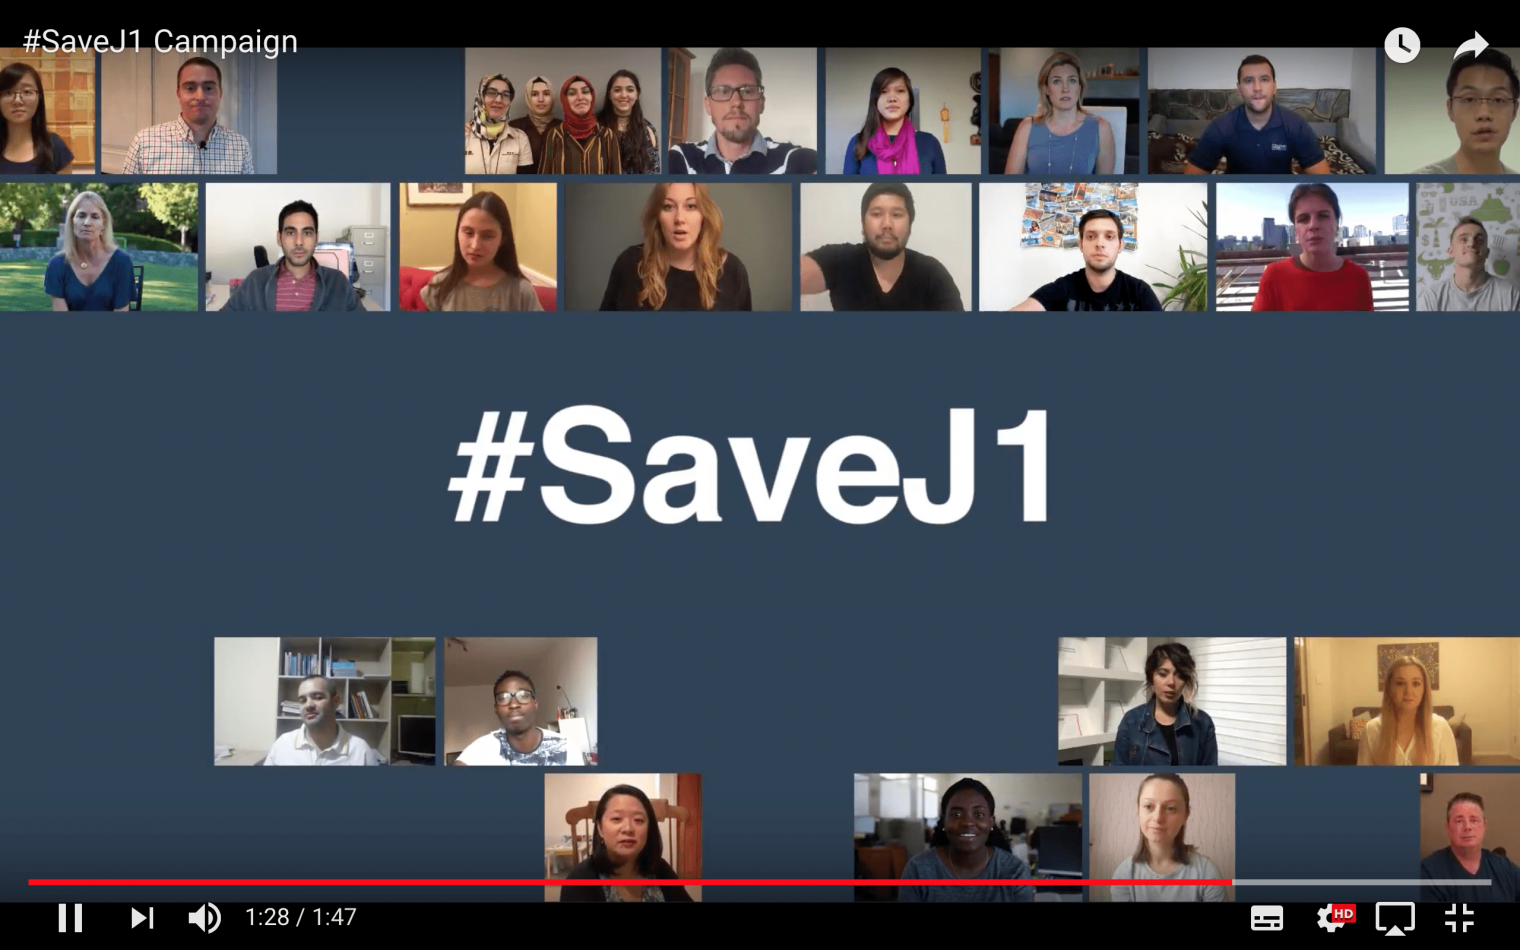 Alliance for Cultural Exchange releases #SaveJ1 Campaign Video